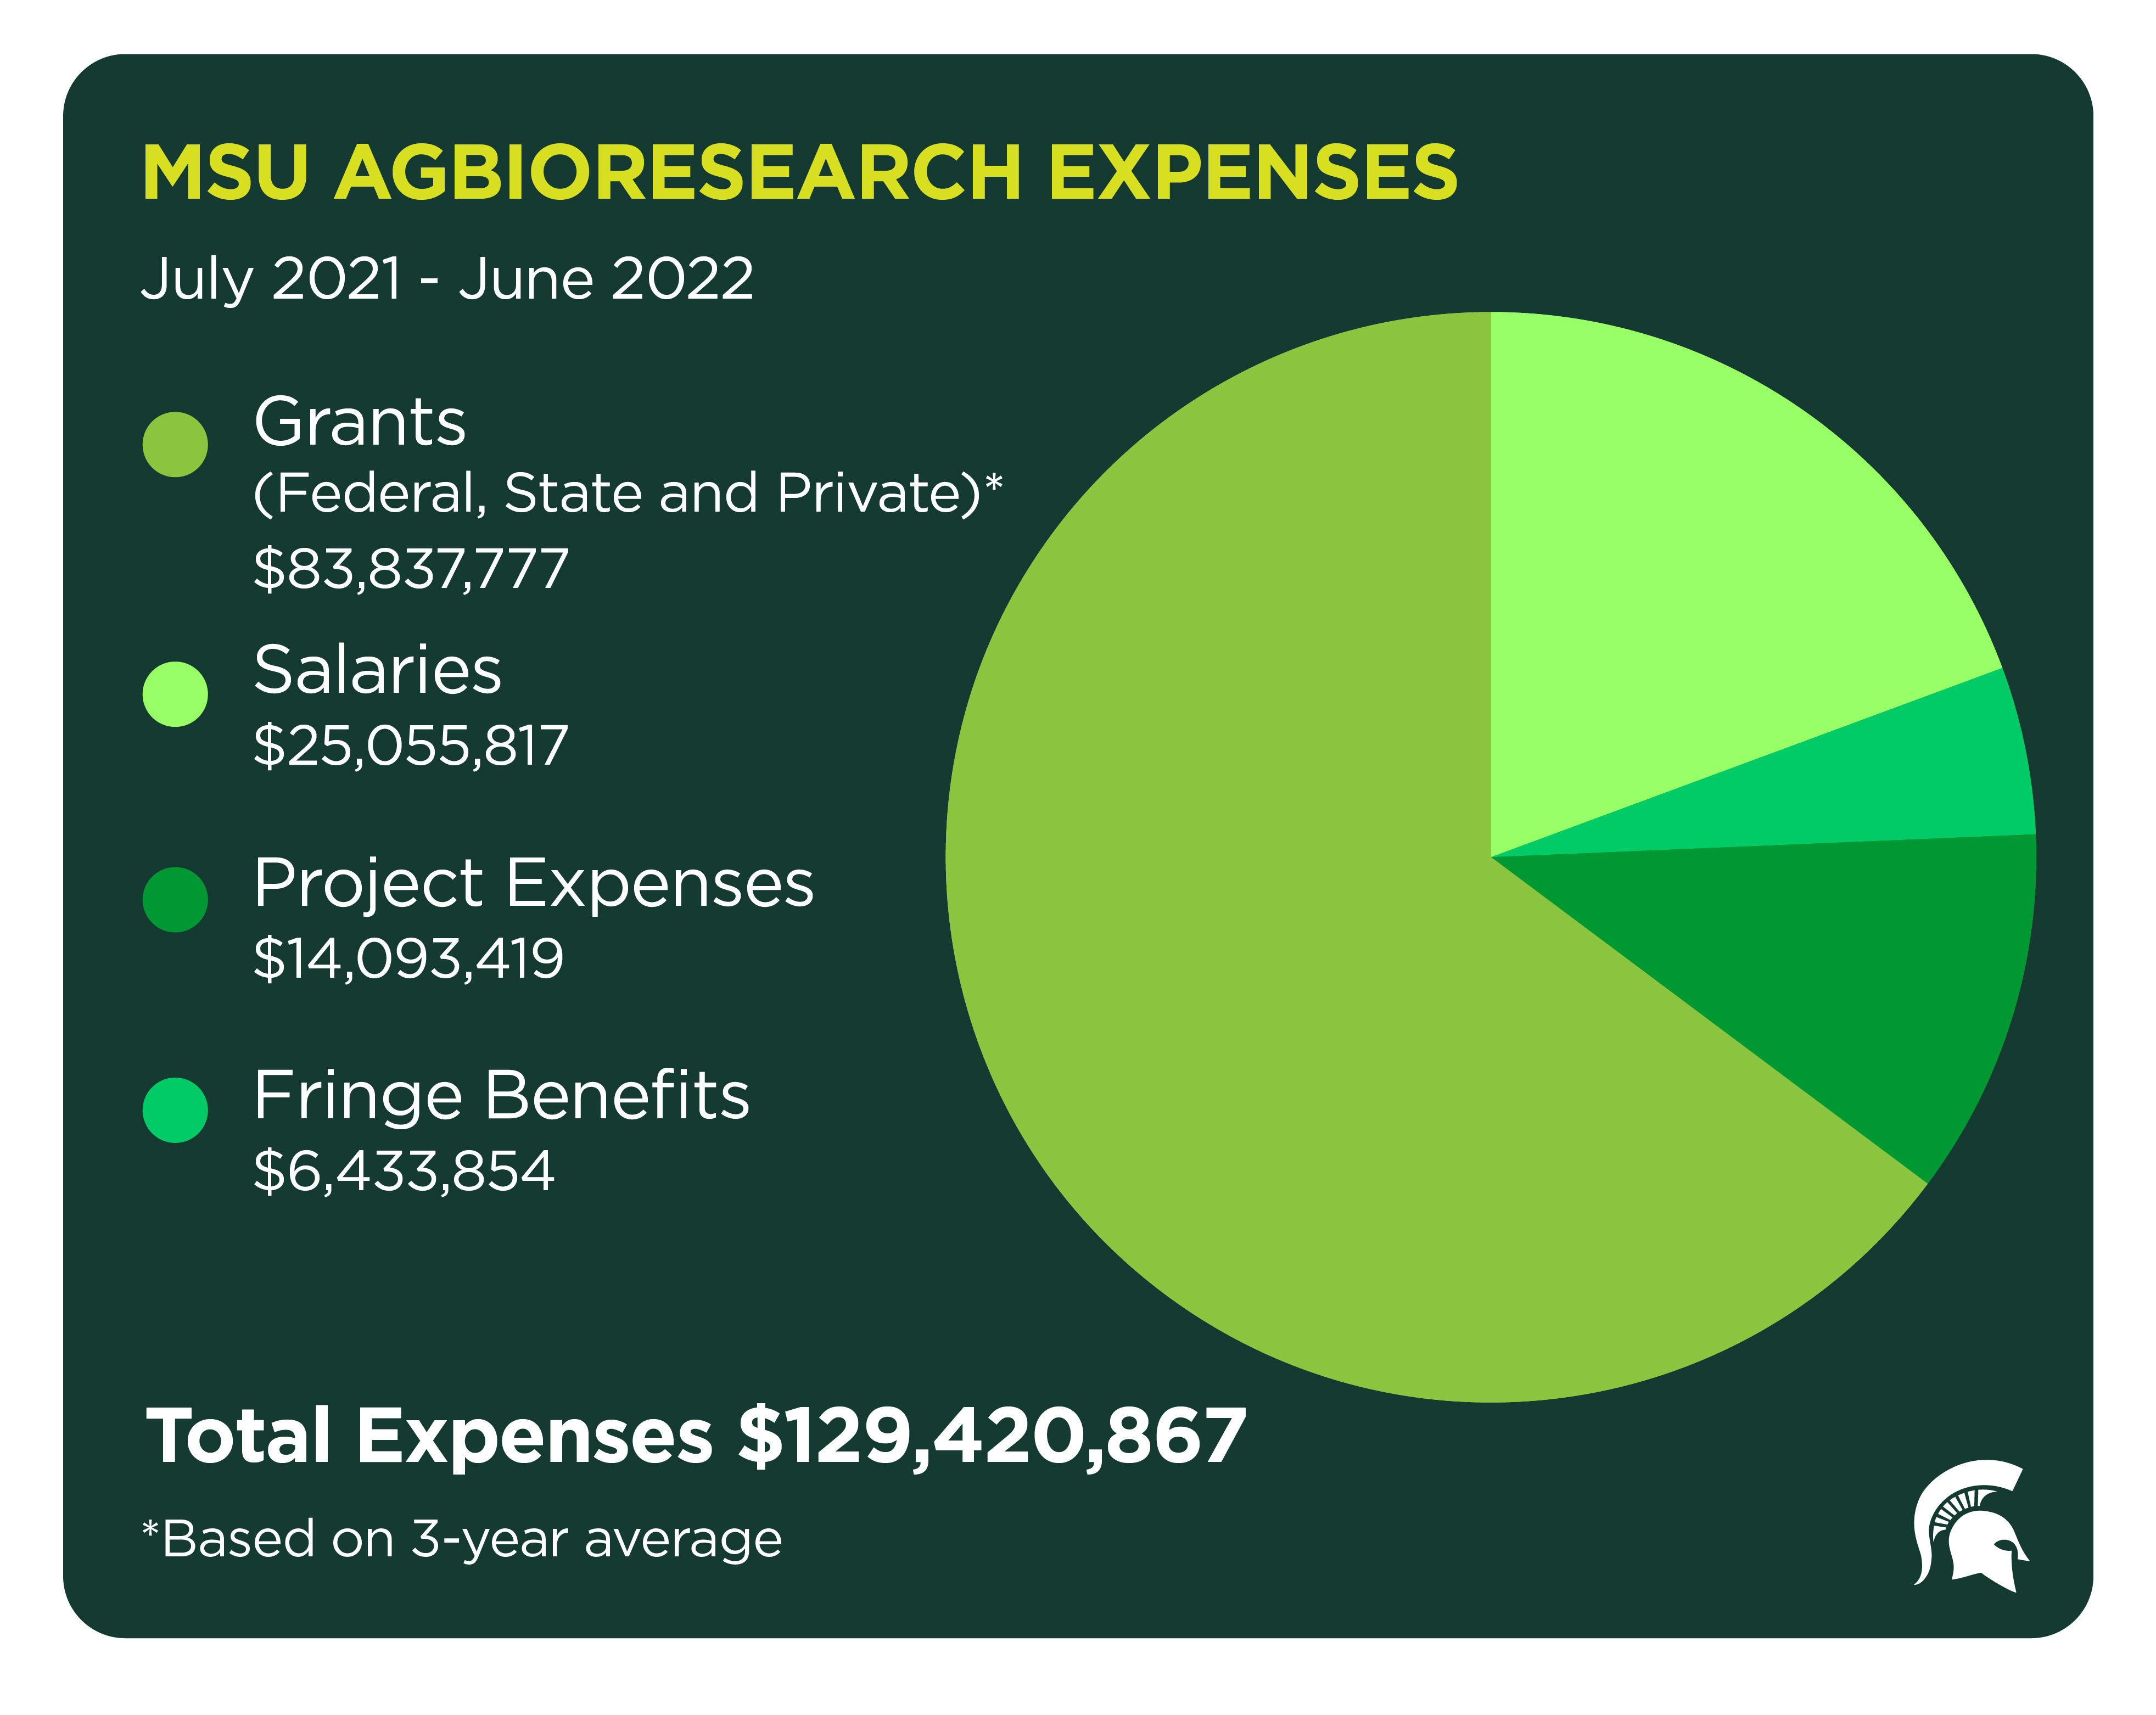 MSU AgBioResearch expenses totaled more than $129M.